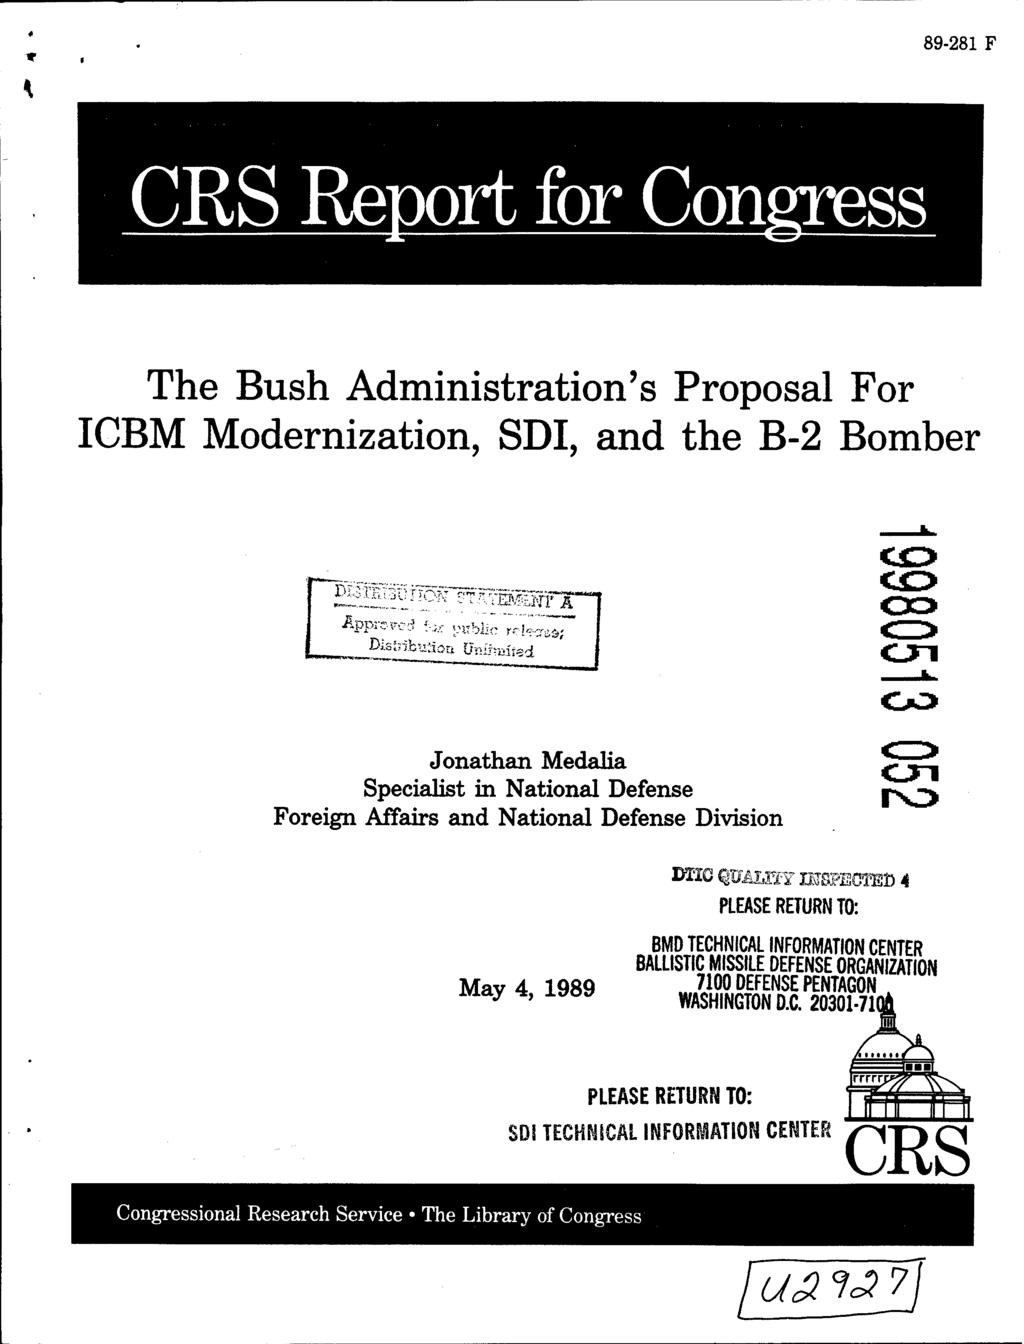 CRS Report for Con The Bush Administration's Proposal For ICBM Modernization, SDI, and the B-2 Bomber Approved {,i. c, nt y,,.